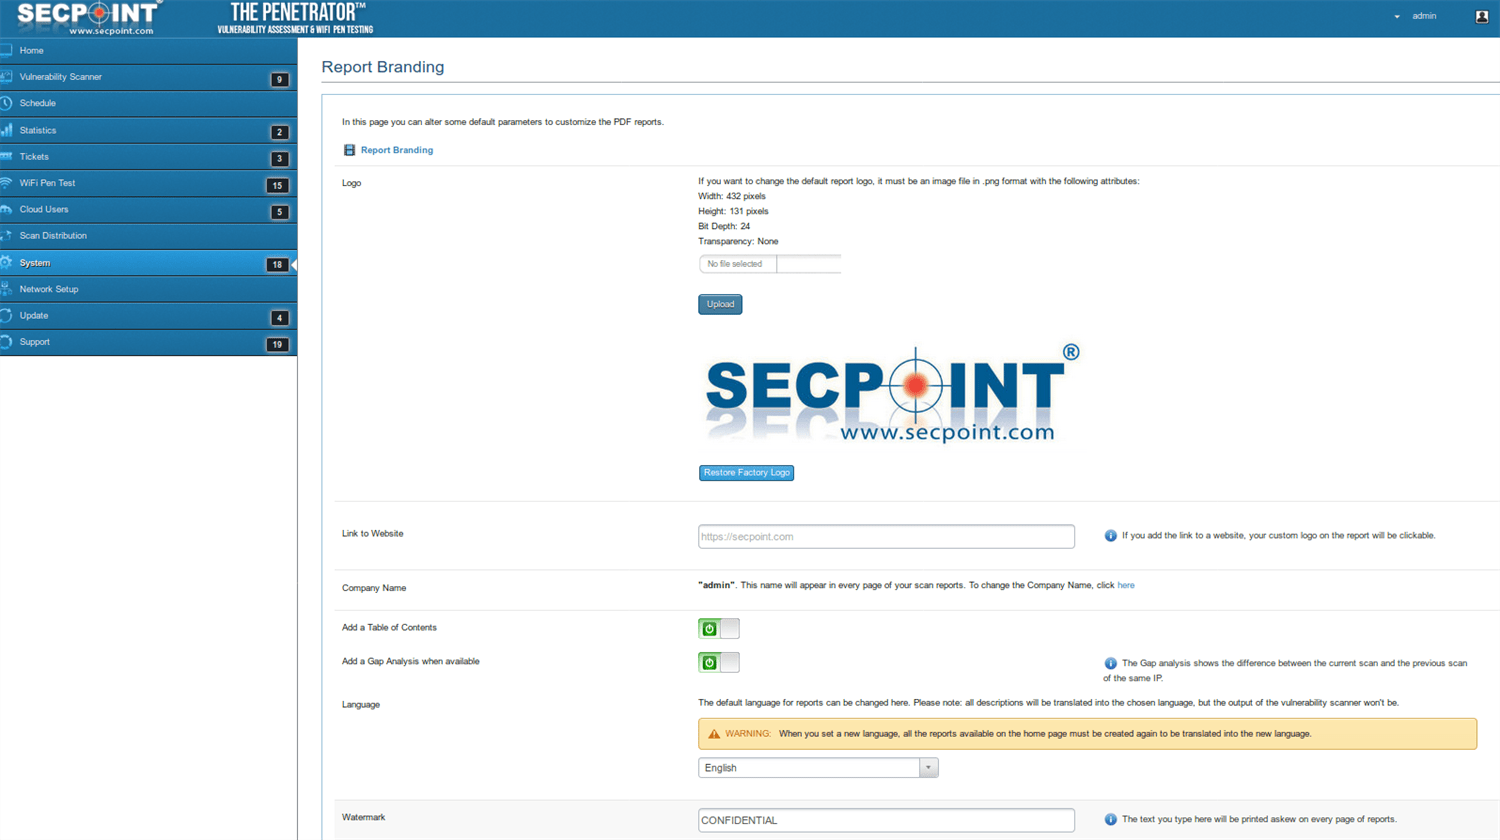 SecPoint Penetrator S9 - 512 IP Concurrent Scan License Vulnerability Scanner Appliance (1 Year License) - SecPoint